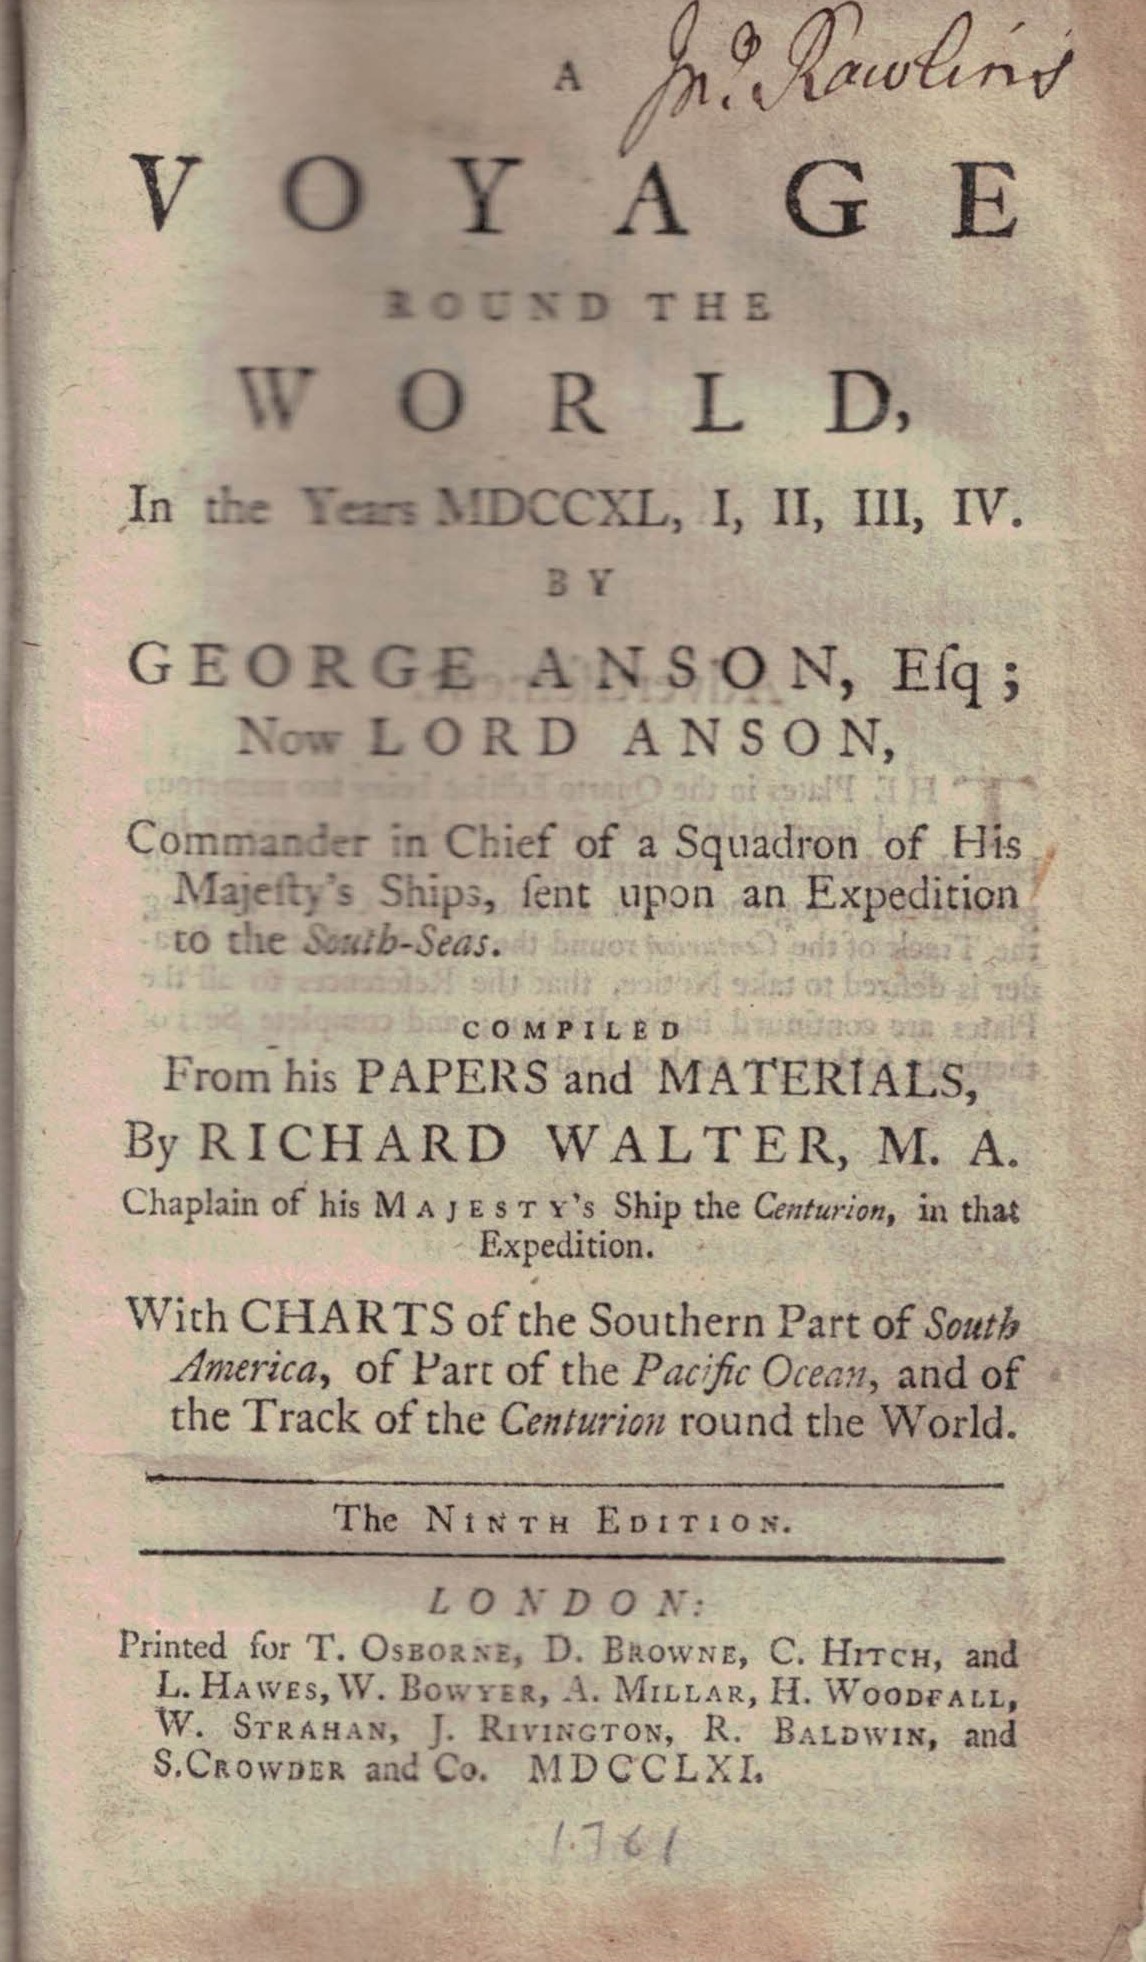 A Voyage Round the World in the Years MDCCXL. Volume I - books I, II, & III. 1761.